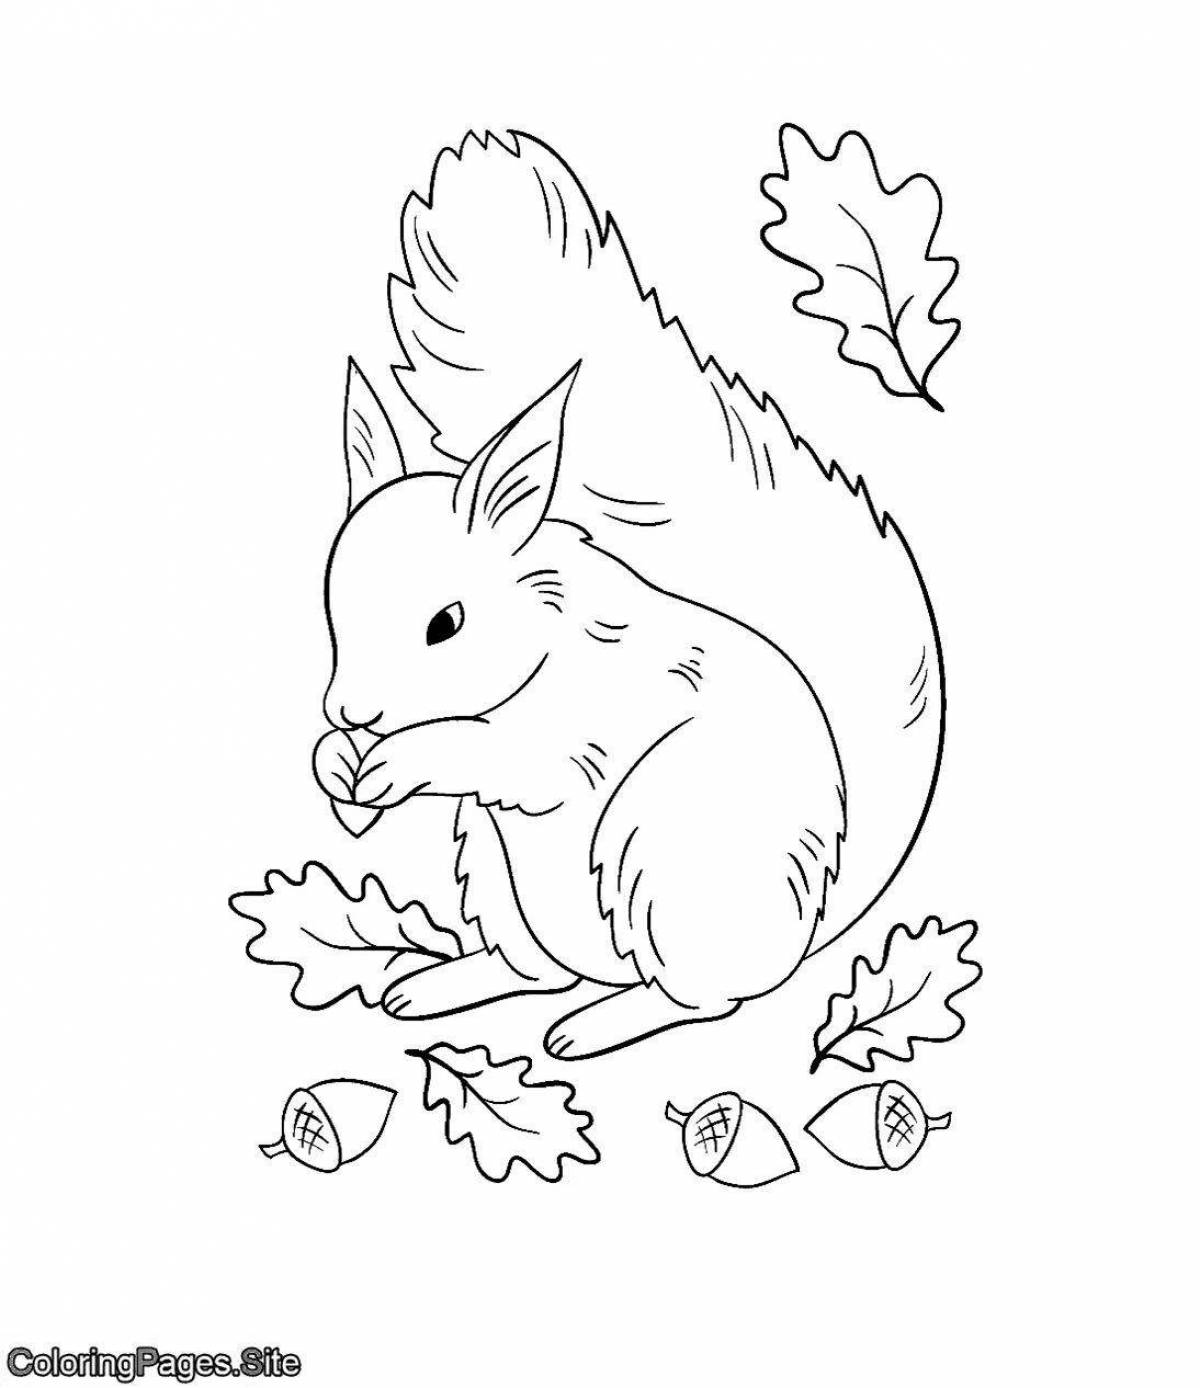 Live little squirrel coloring book